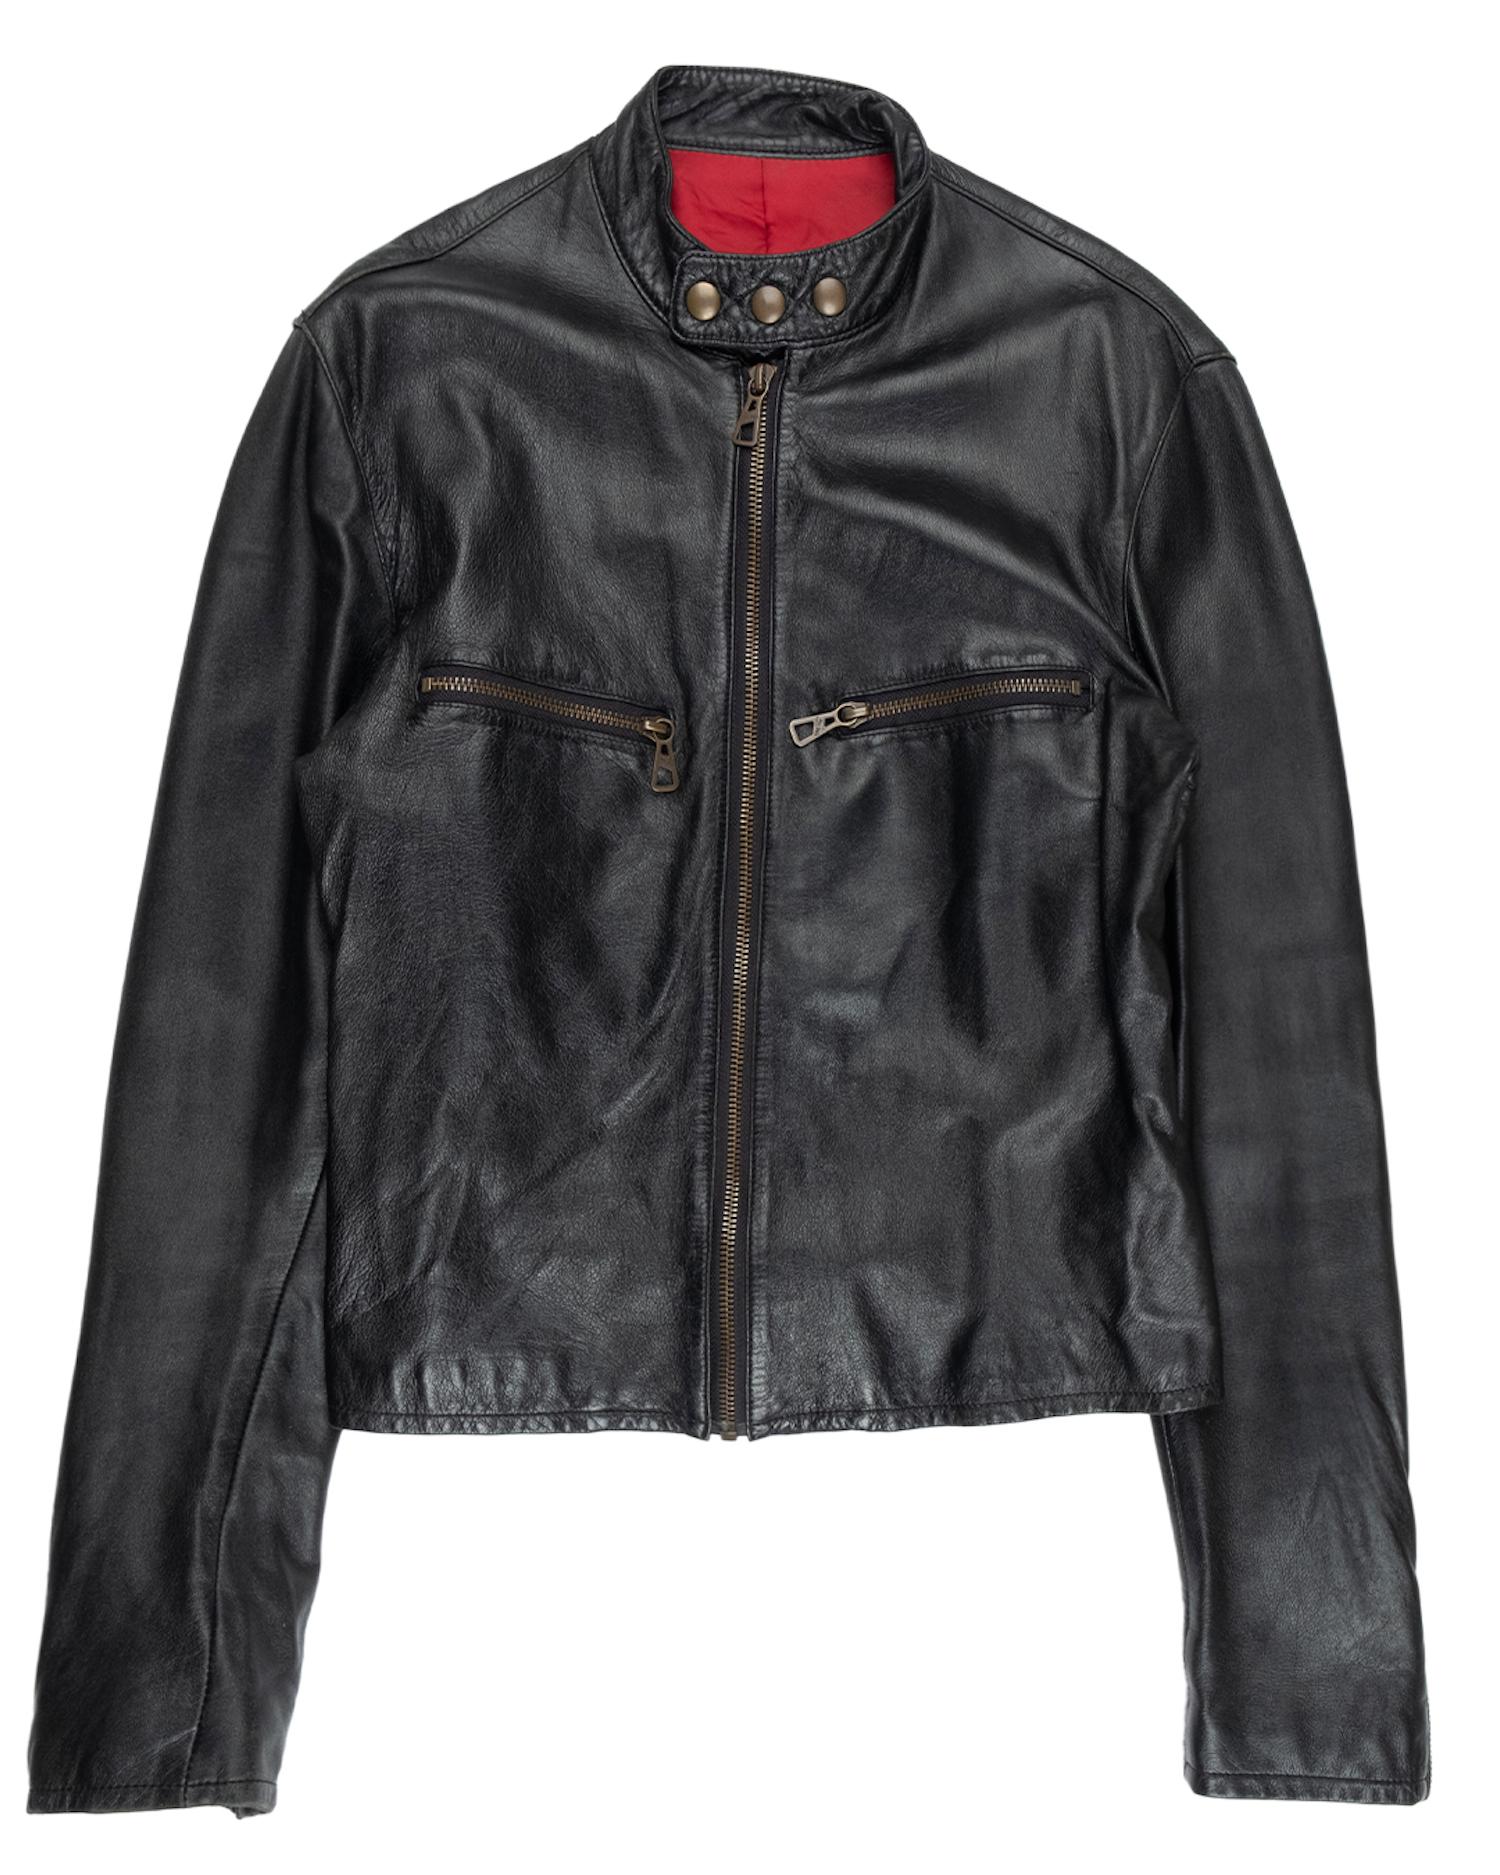 Jean Paul Gaultier AW1999 Moto Leather Jacket In Good Condition In Beverly Hills, CA